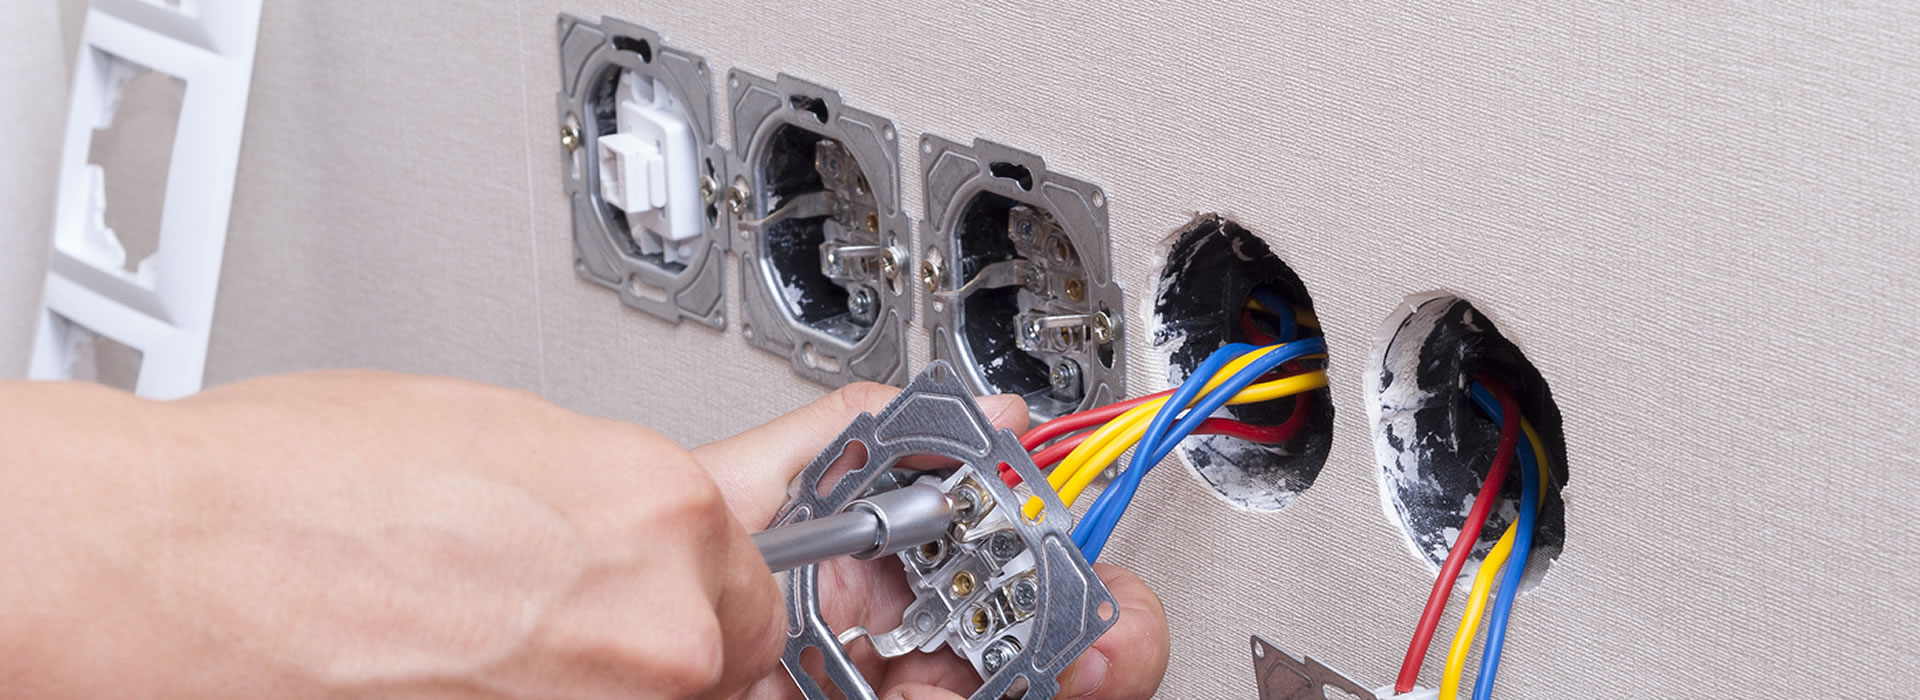 Electrical Outlet Replacement in Hauppauge, NY